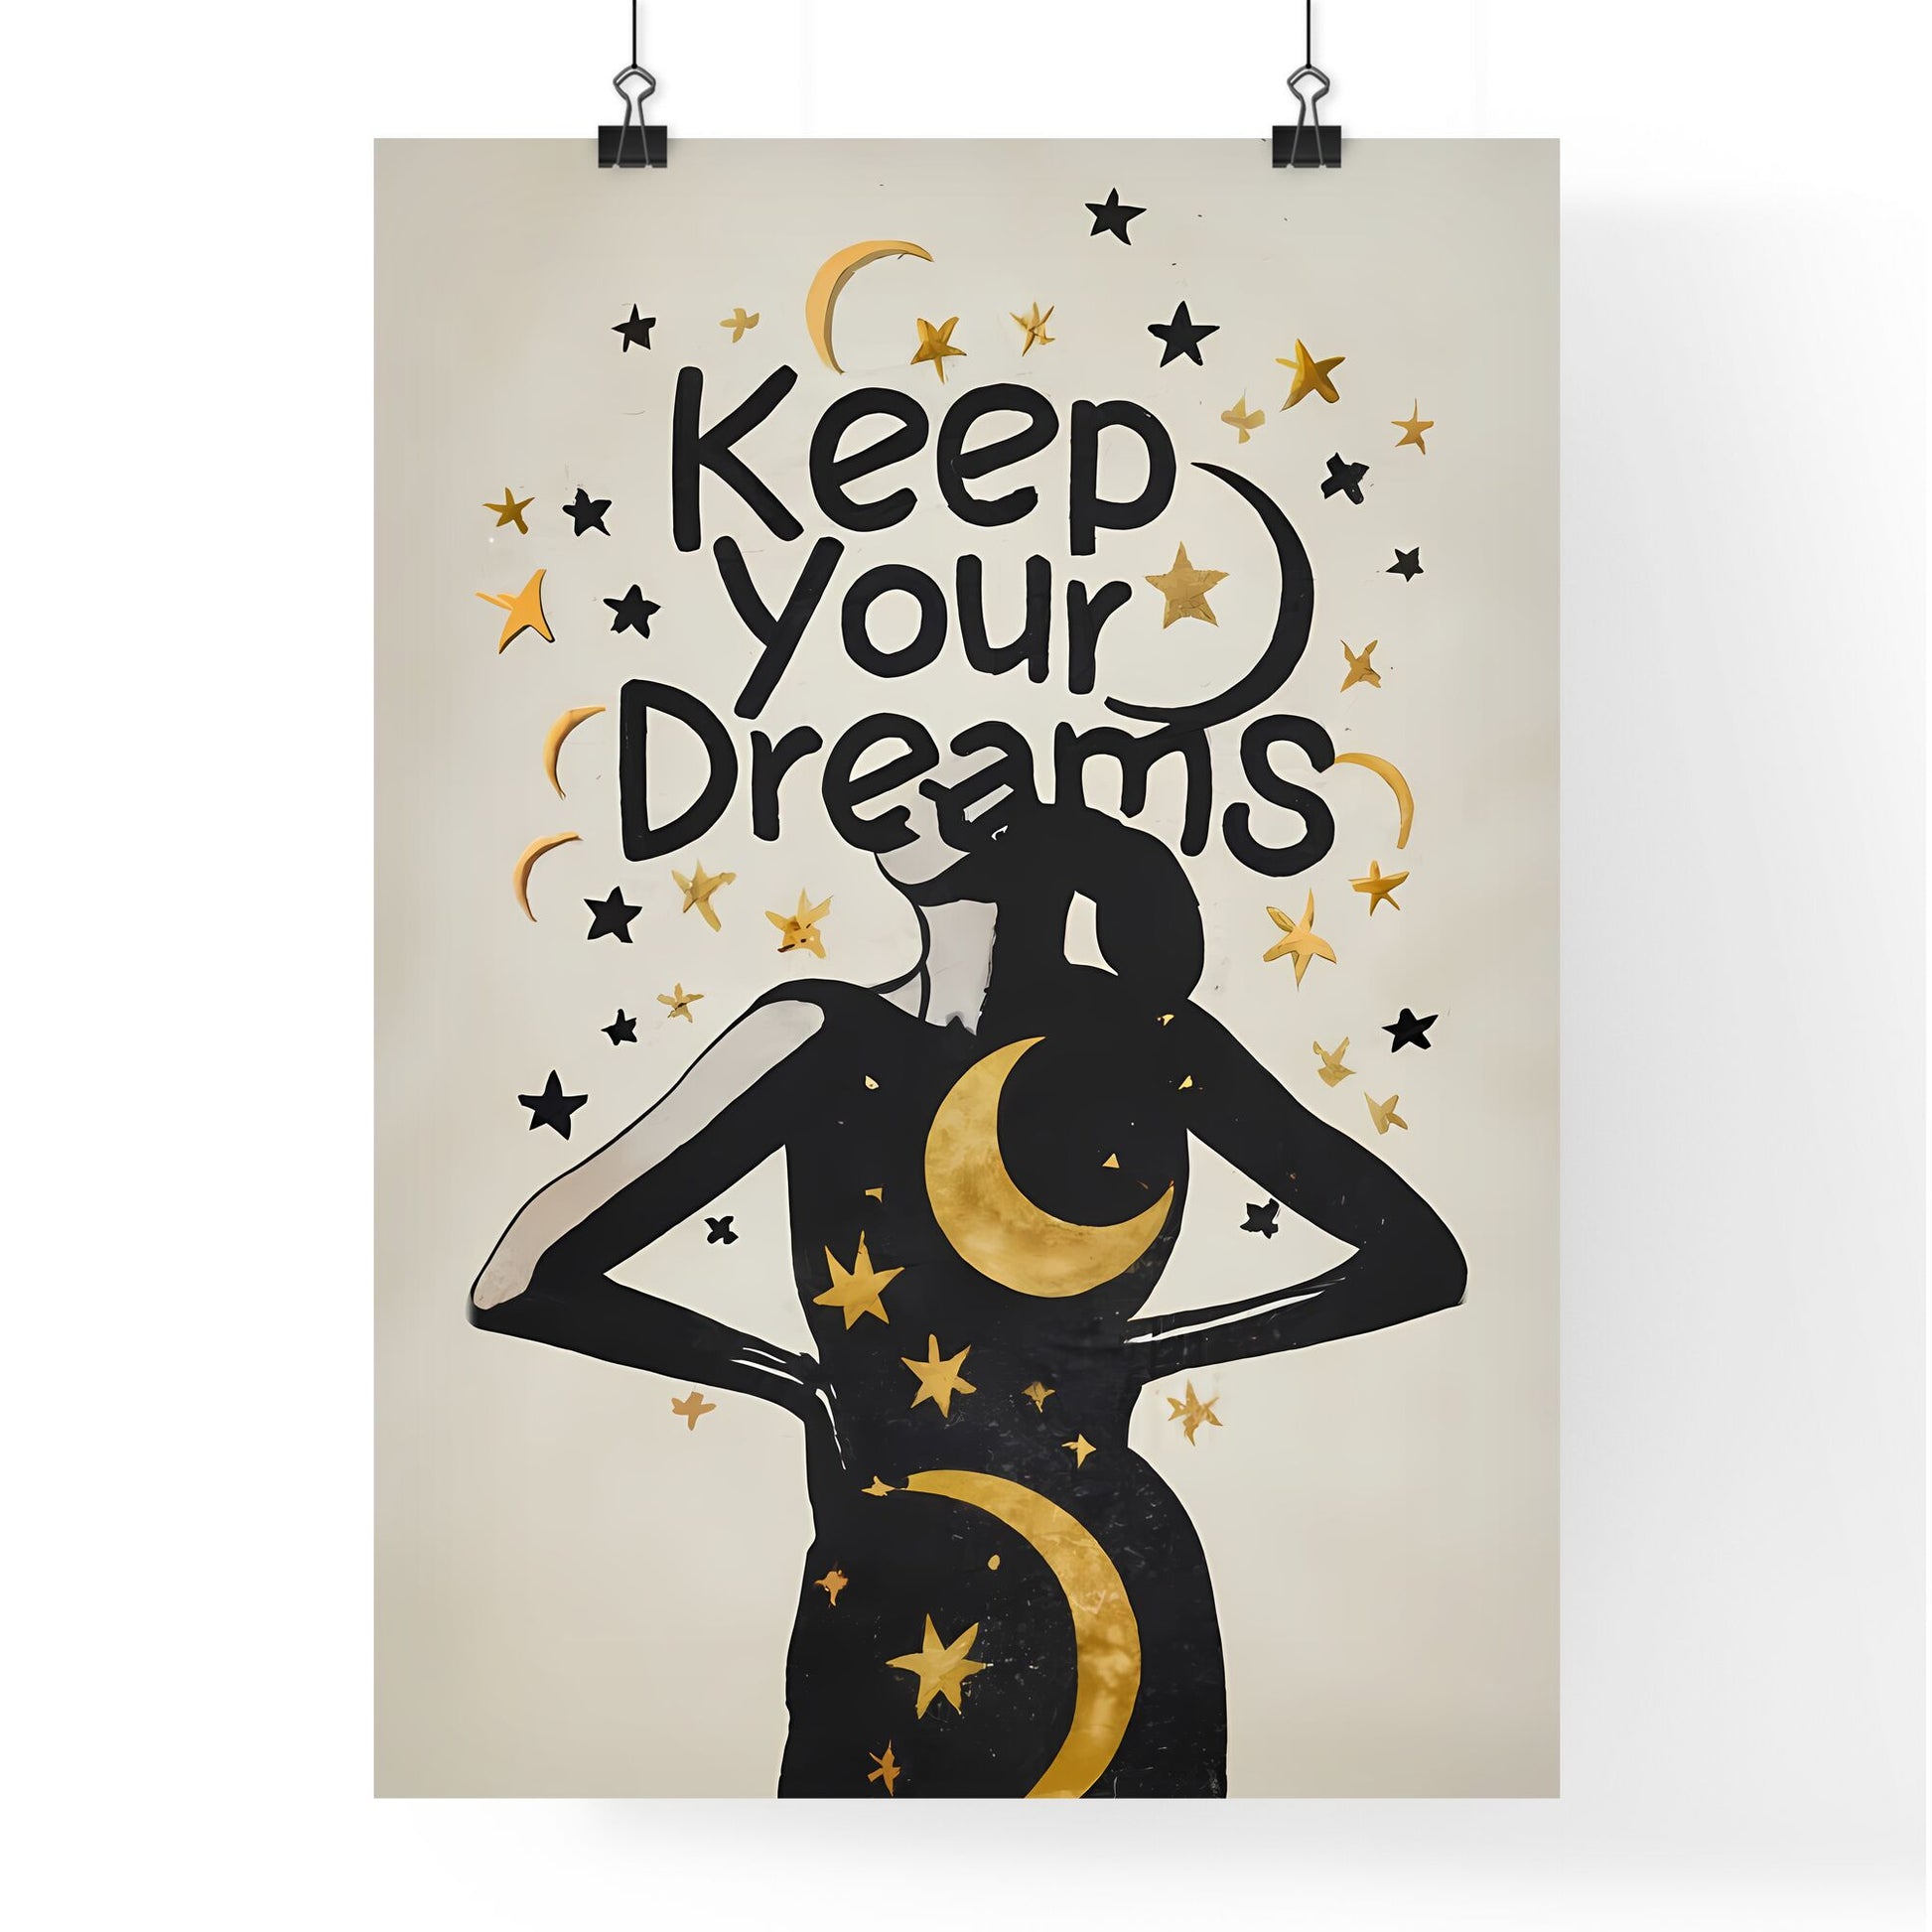 Keep Your Dreams - A Drawing Of A Woman With A Moon And Stars Default Title